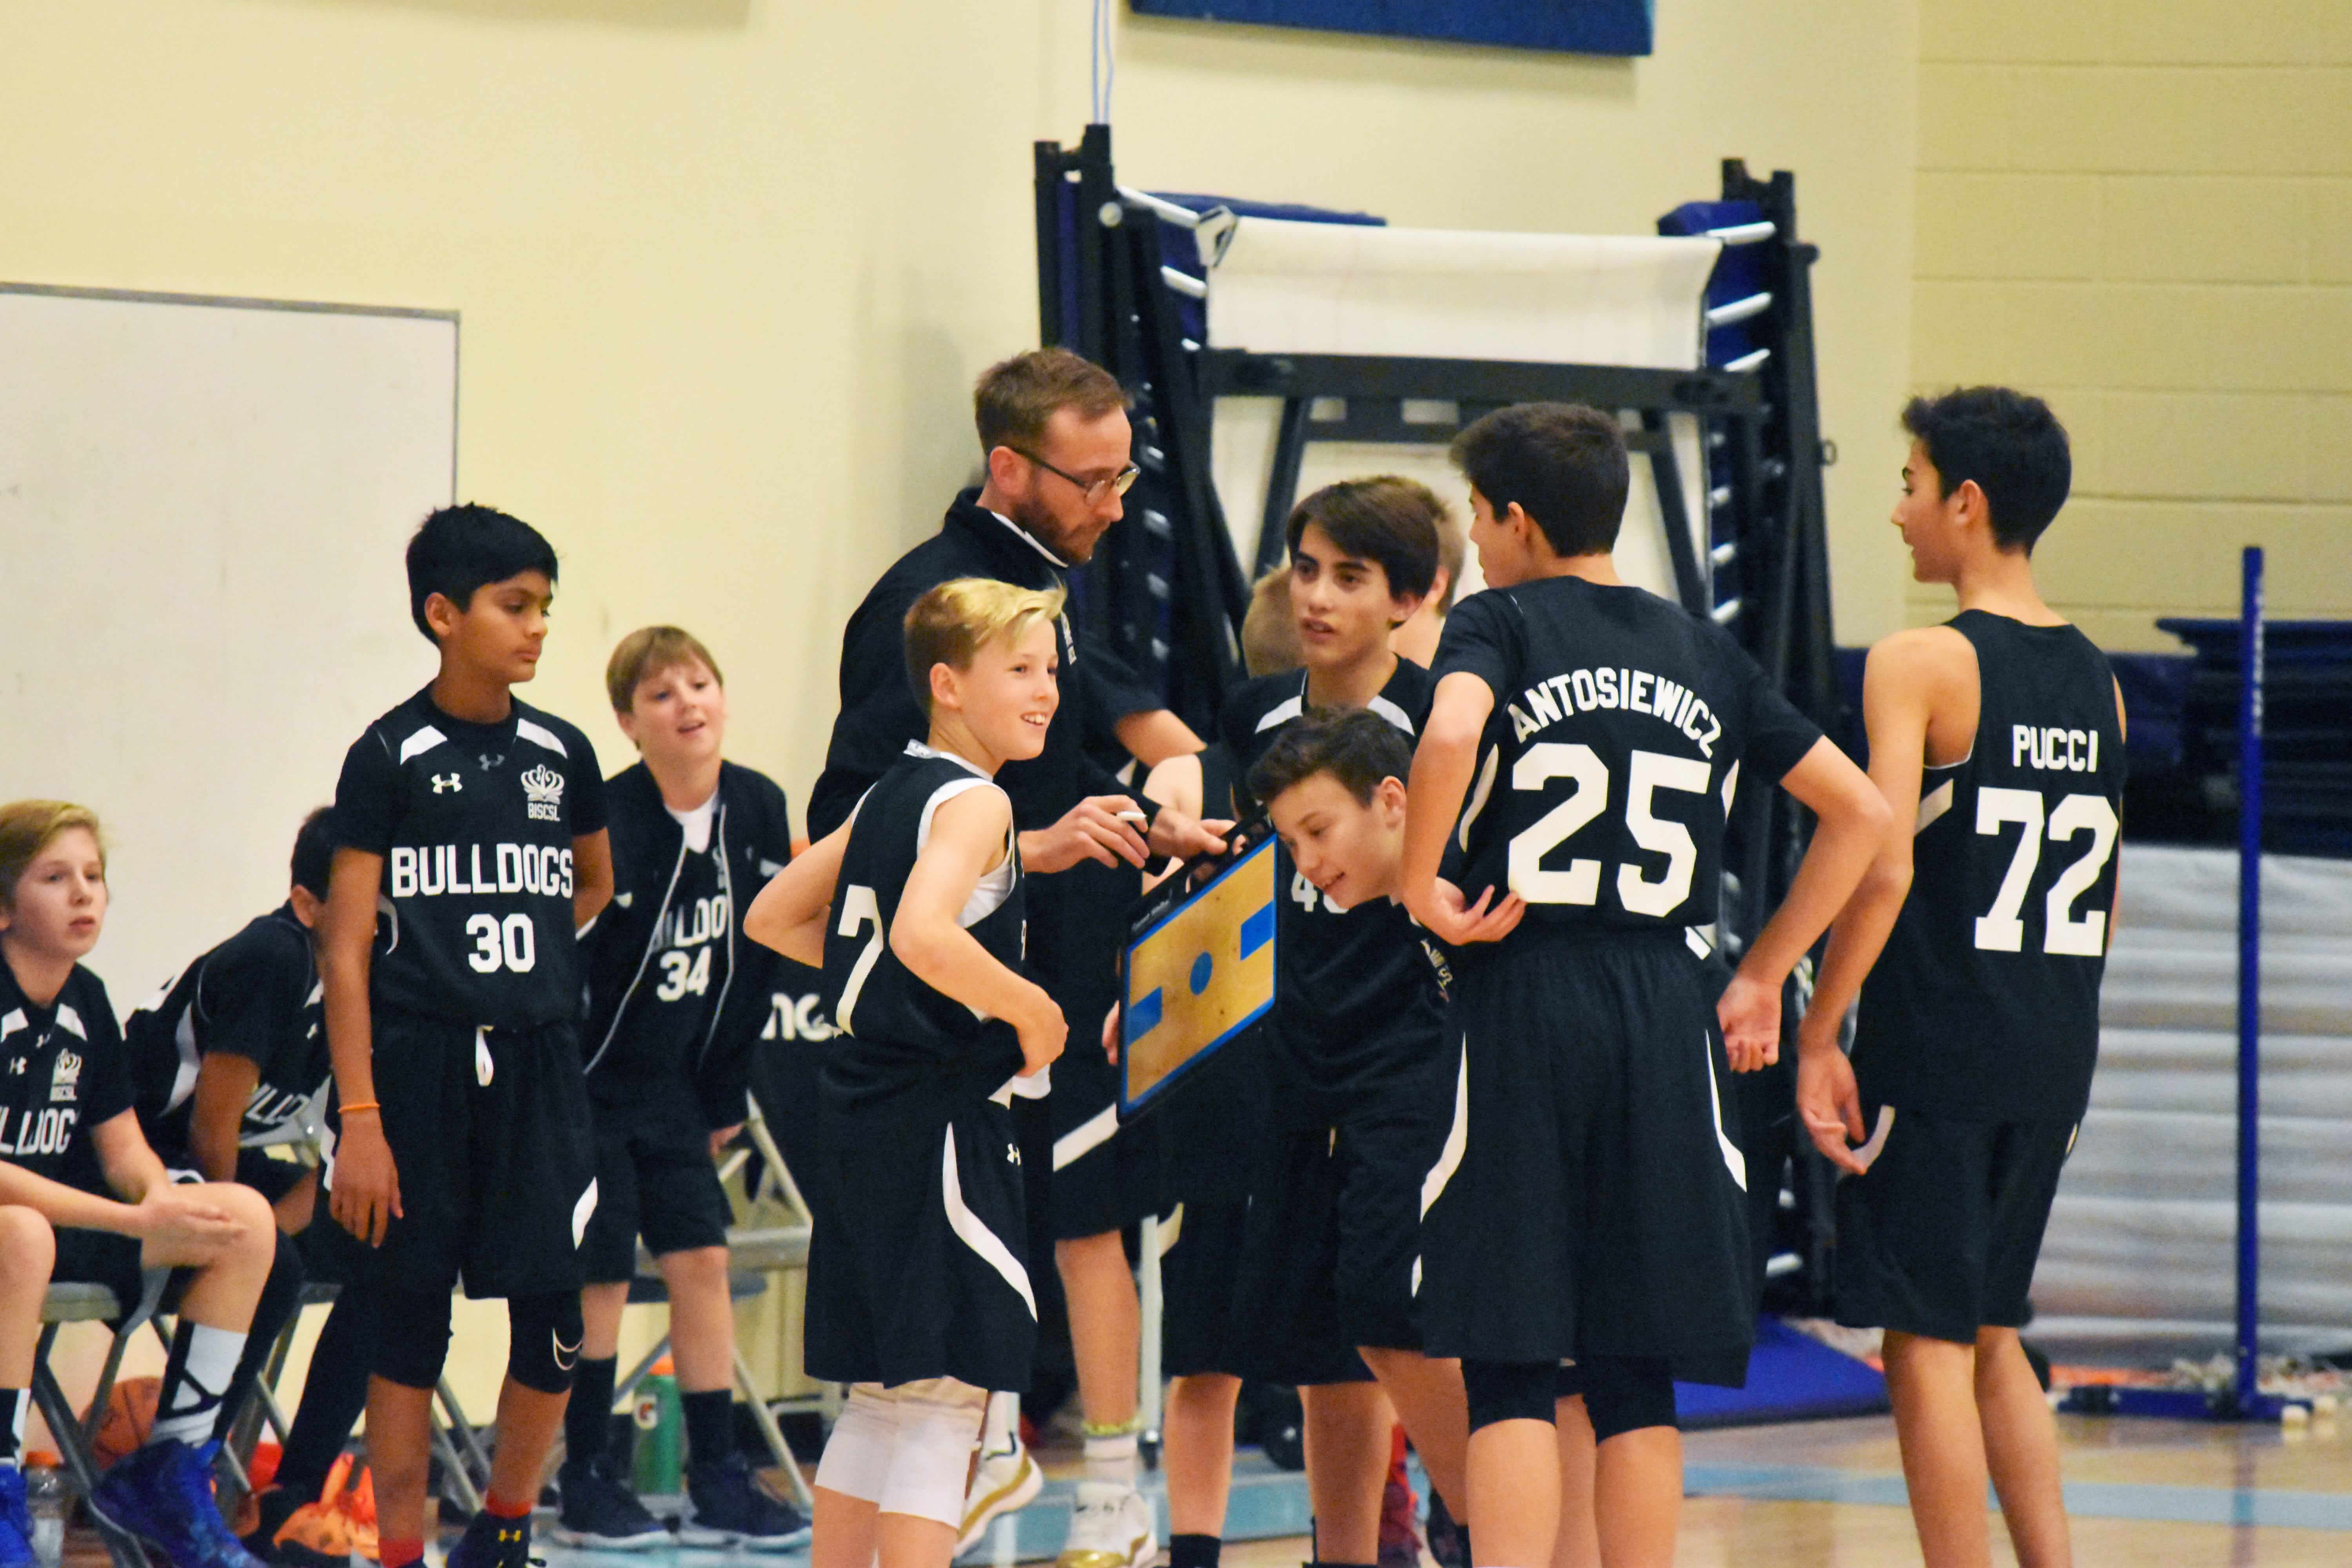 JV Boys Score Second Place in Dramatic Basketball Final - jv-boys-score-second-place-in-dramatic-basketball-final